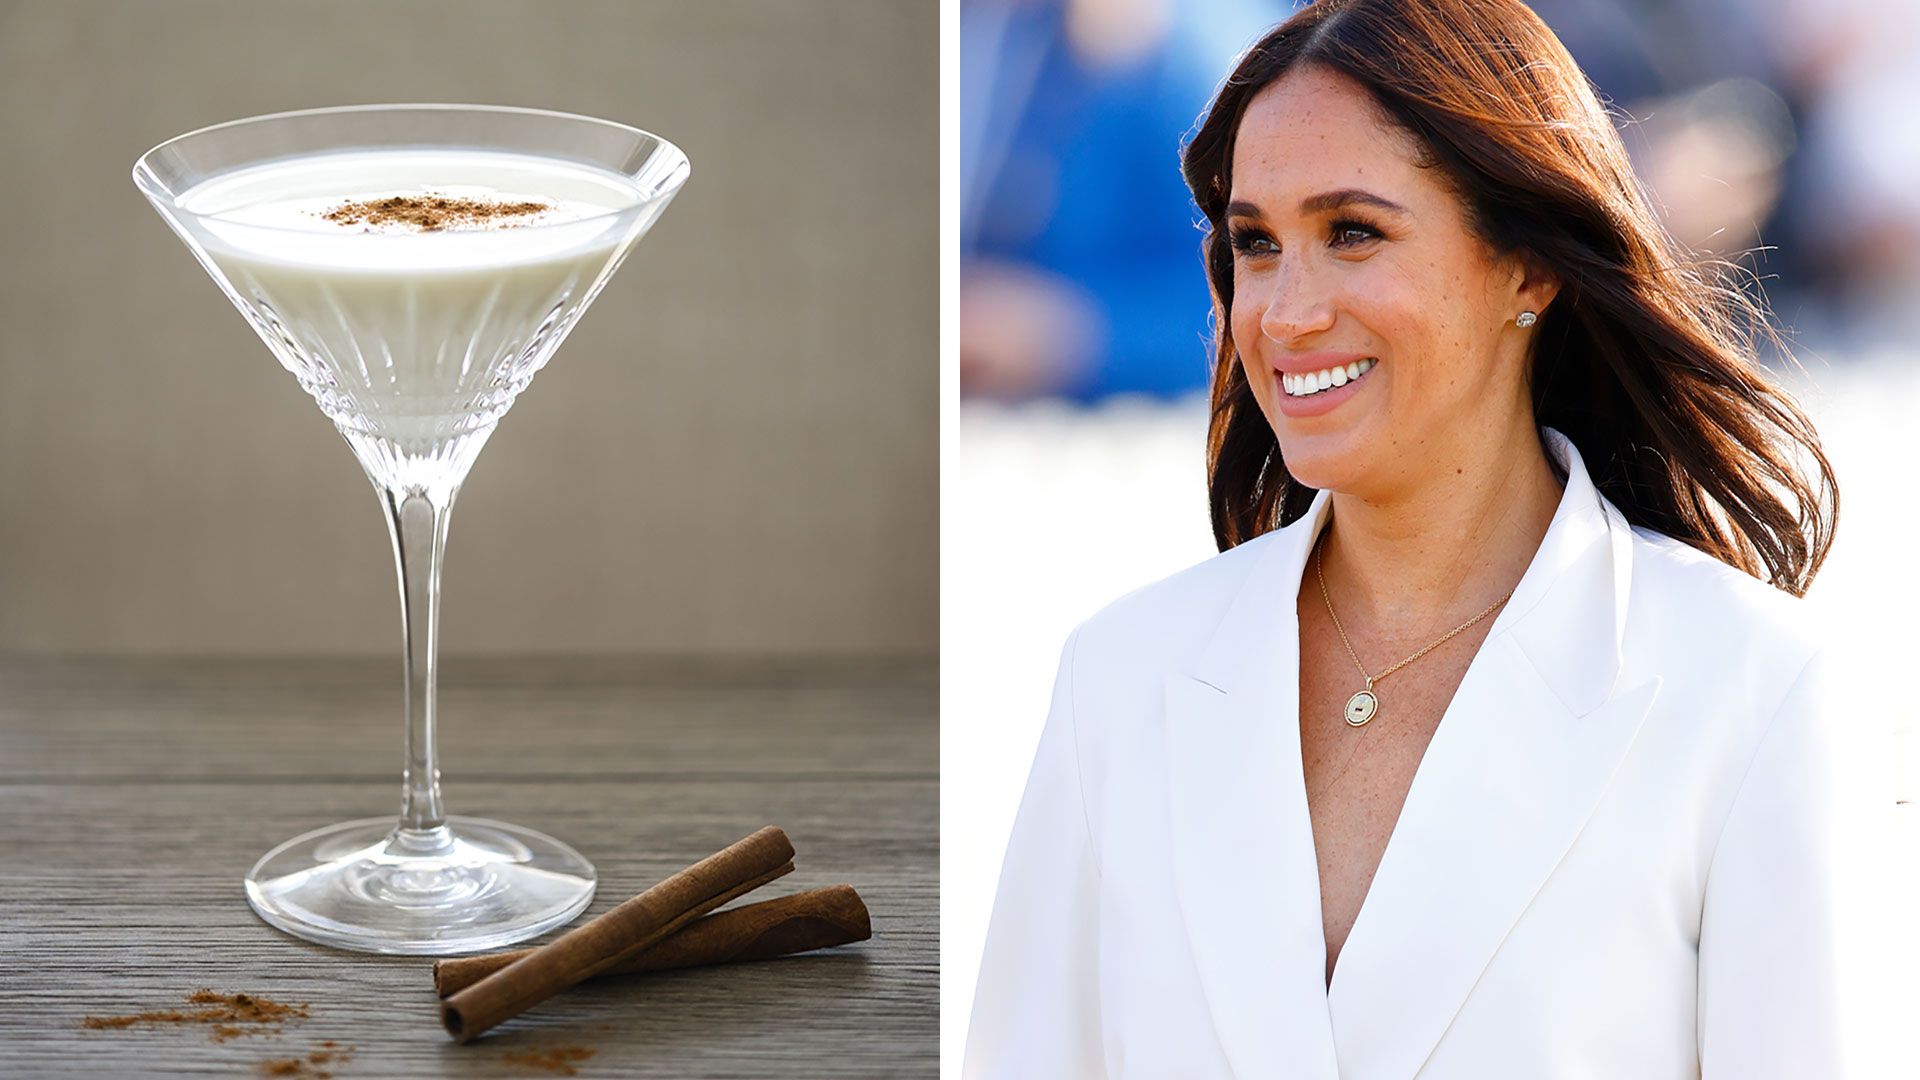 Meghan Markle's creamy Christmas cocktail might be the healthiest royal tipple yet